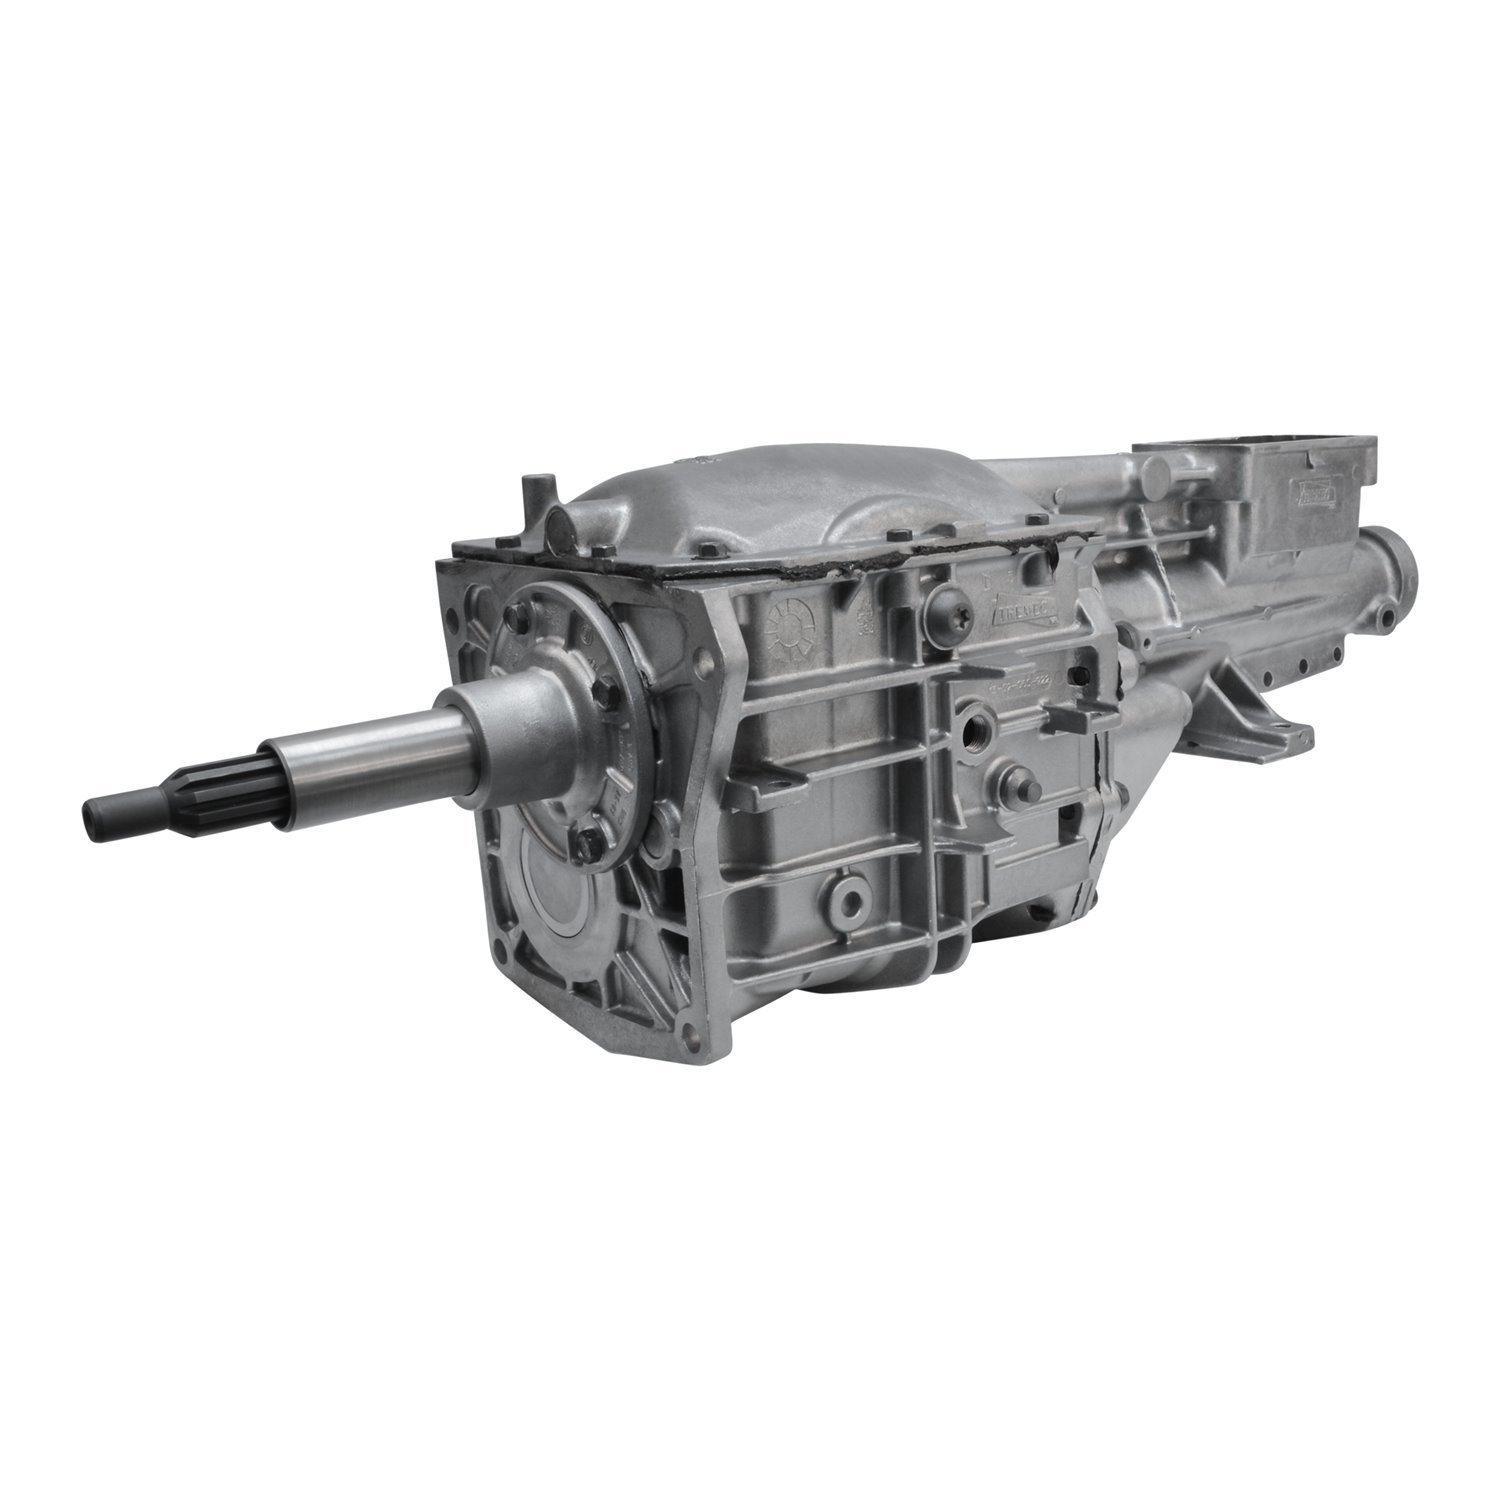 Remanufactured T5 Manual Transmission for Ford 99-04 Mustang 3.8L & 3.9L, 5 Speed